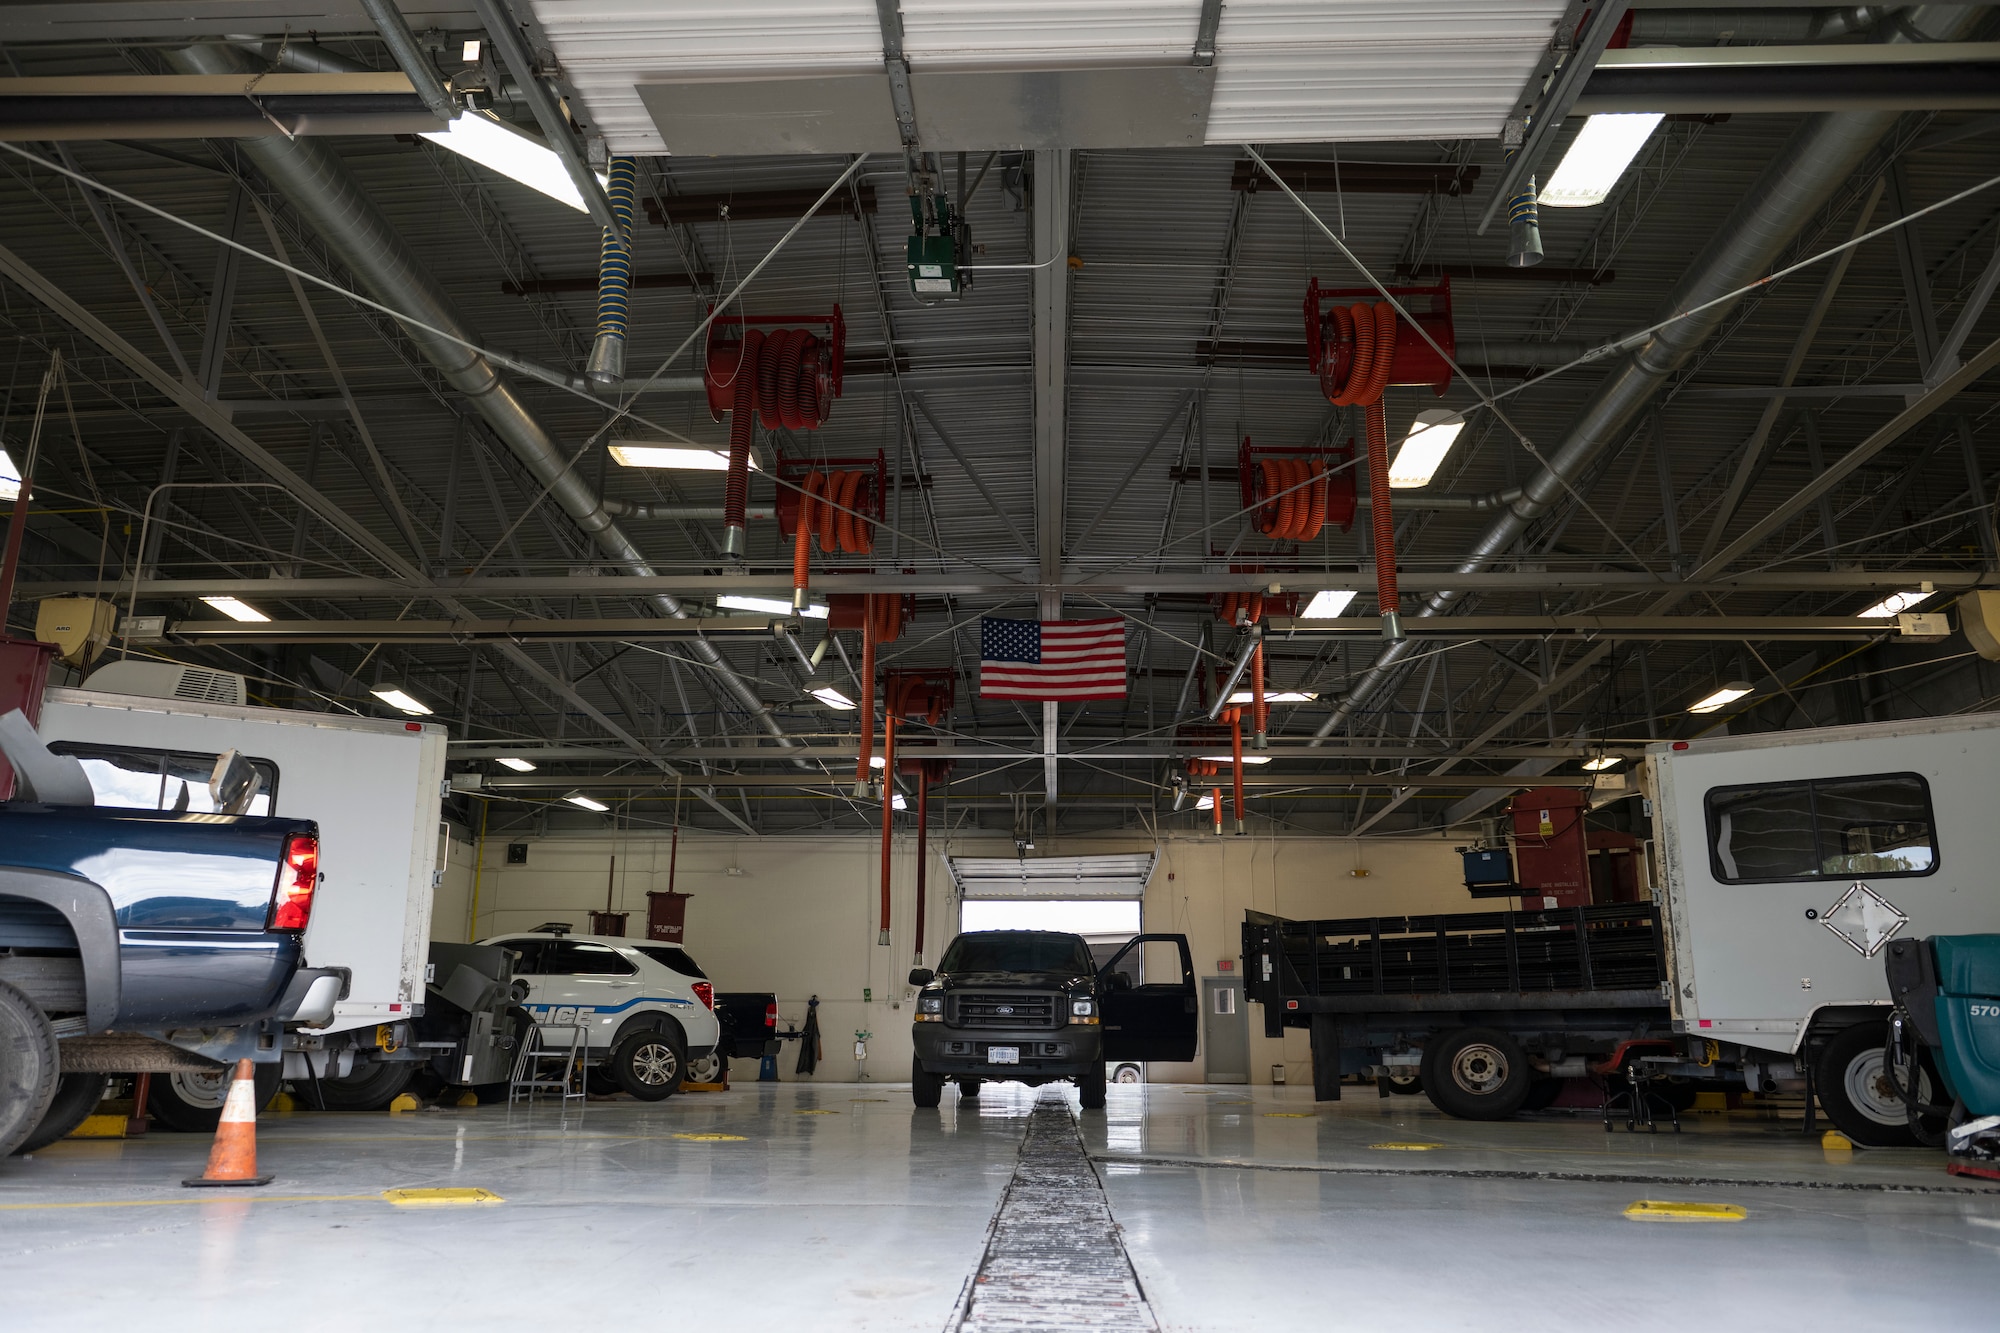 A photo of a car shop with trucks, cop cars, and vans. a truck is parked in the middle and orange pipes hang from the ceiling next to an American flag.